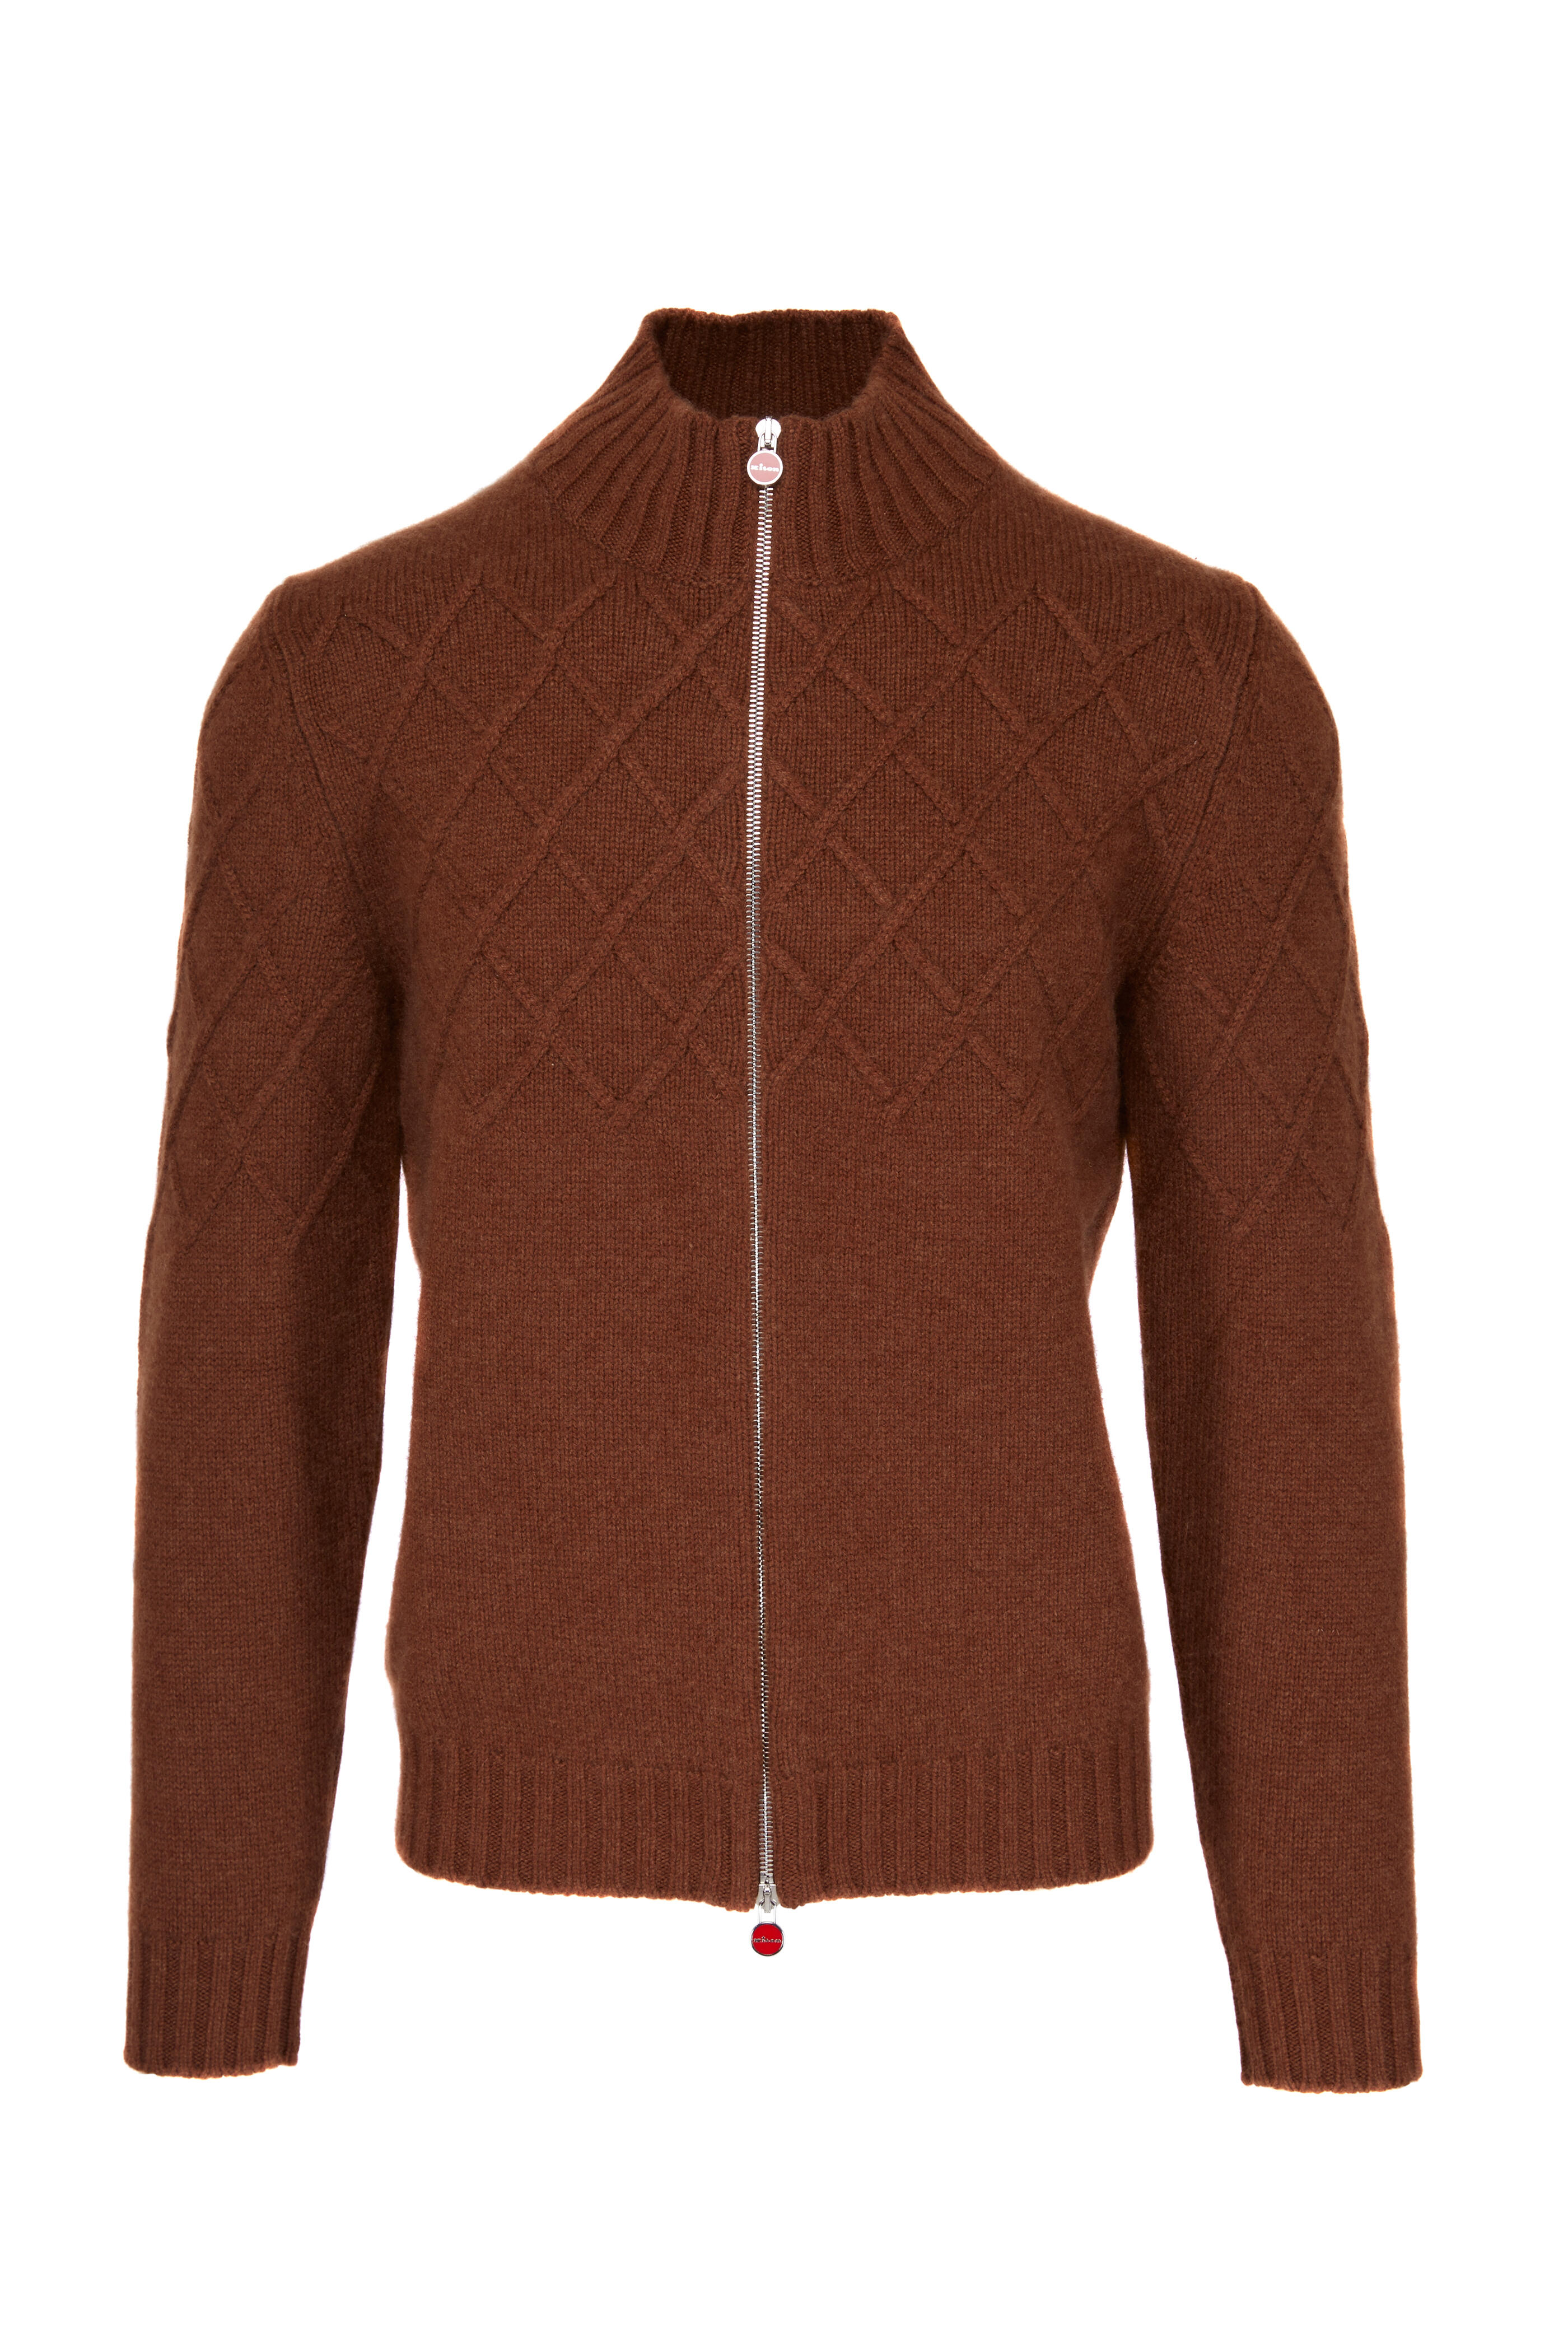 Louis Vuitton D-Ring Detail Cashmere Pullover BROWN. Size S0